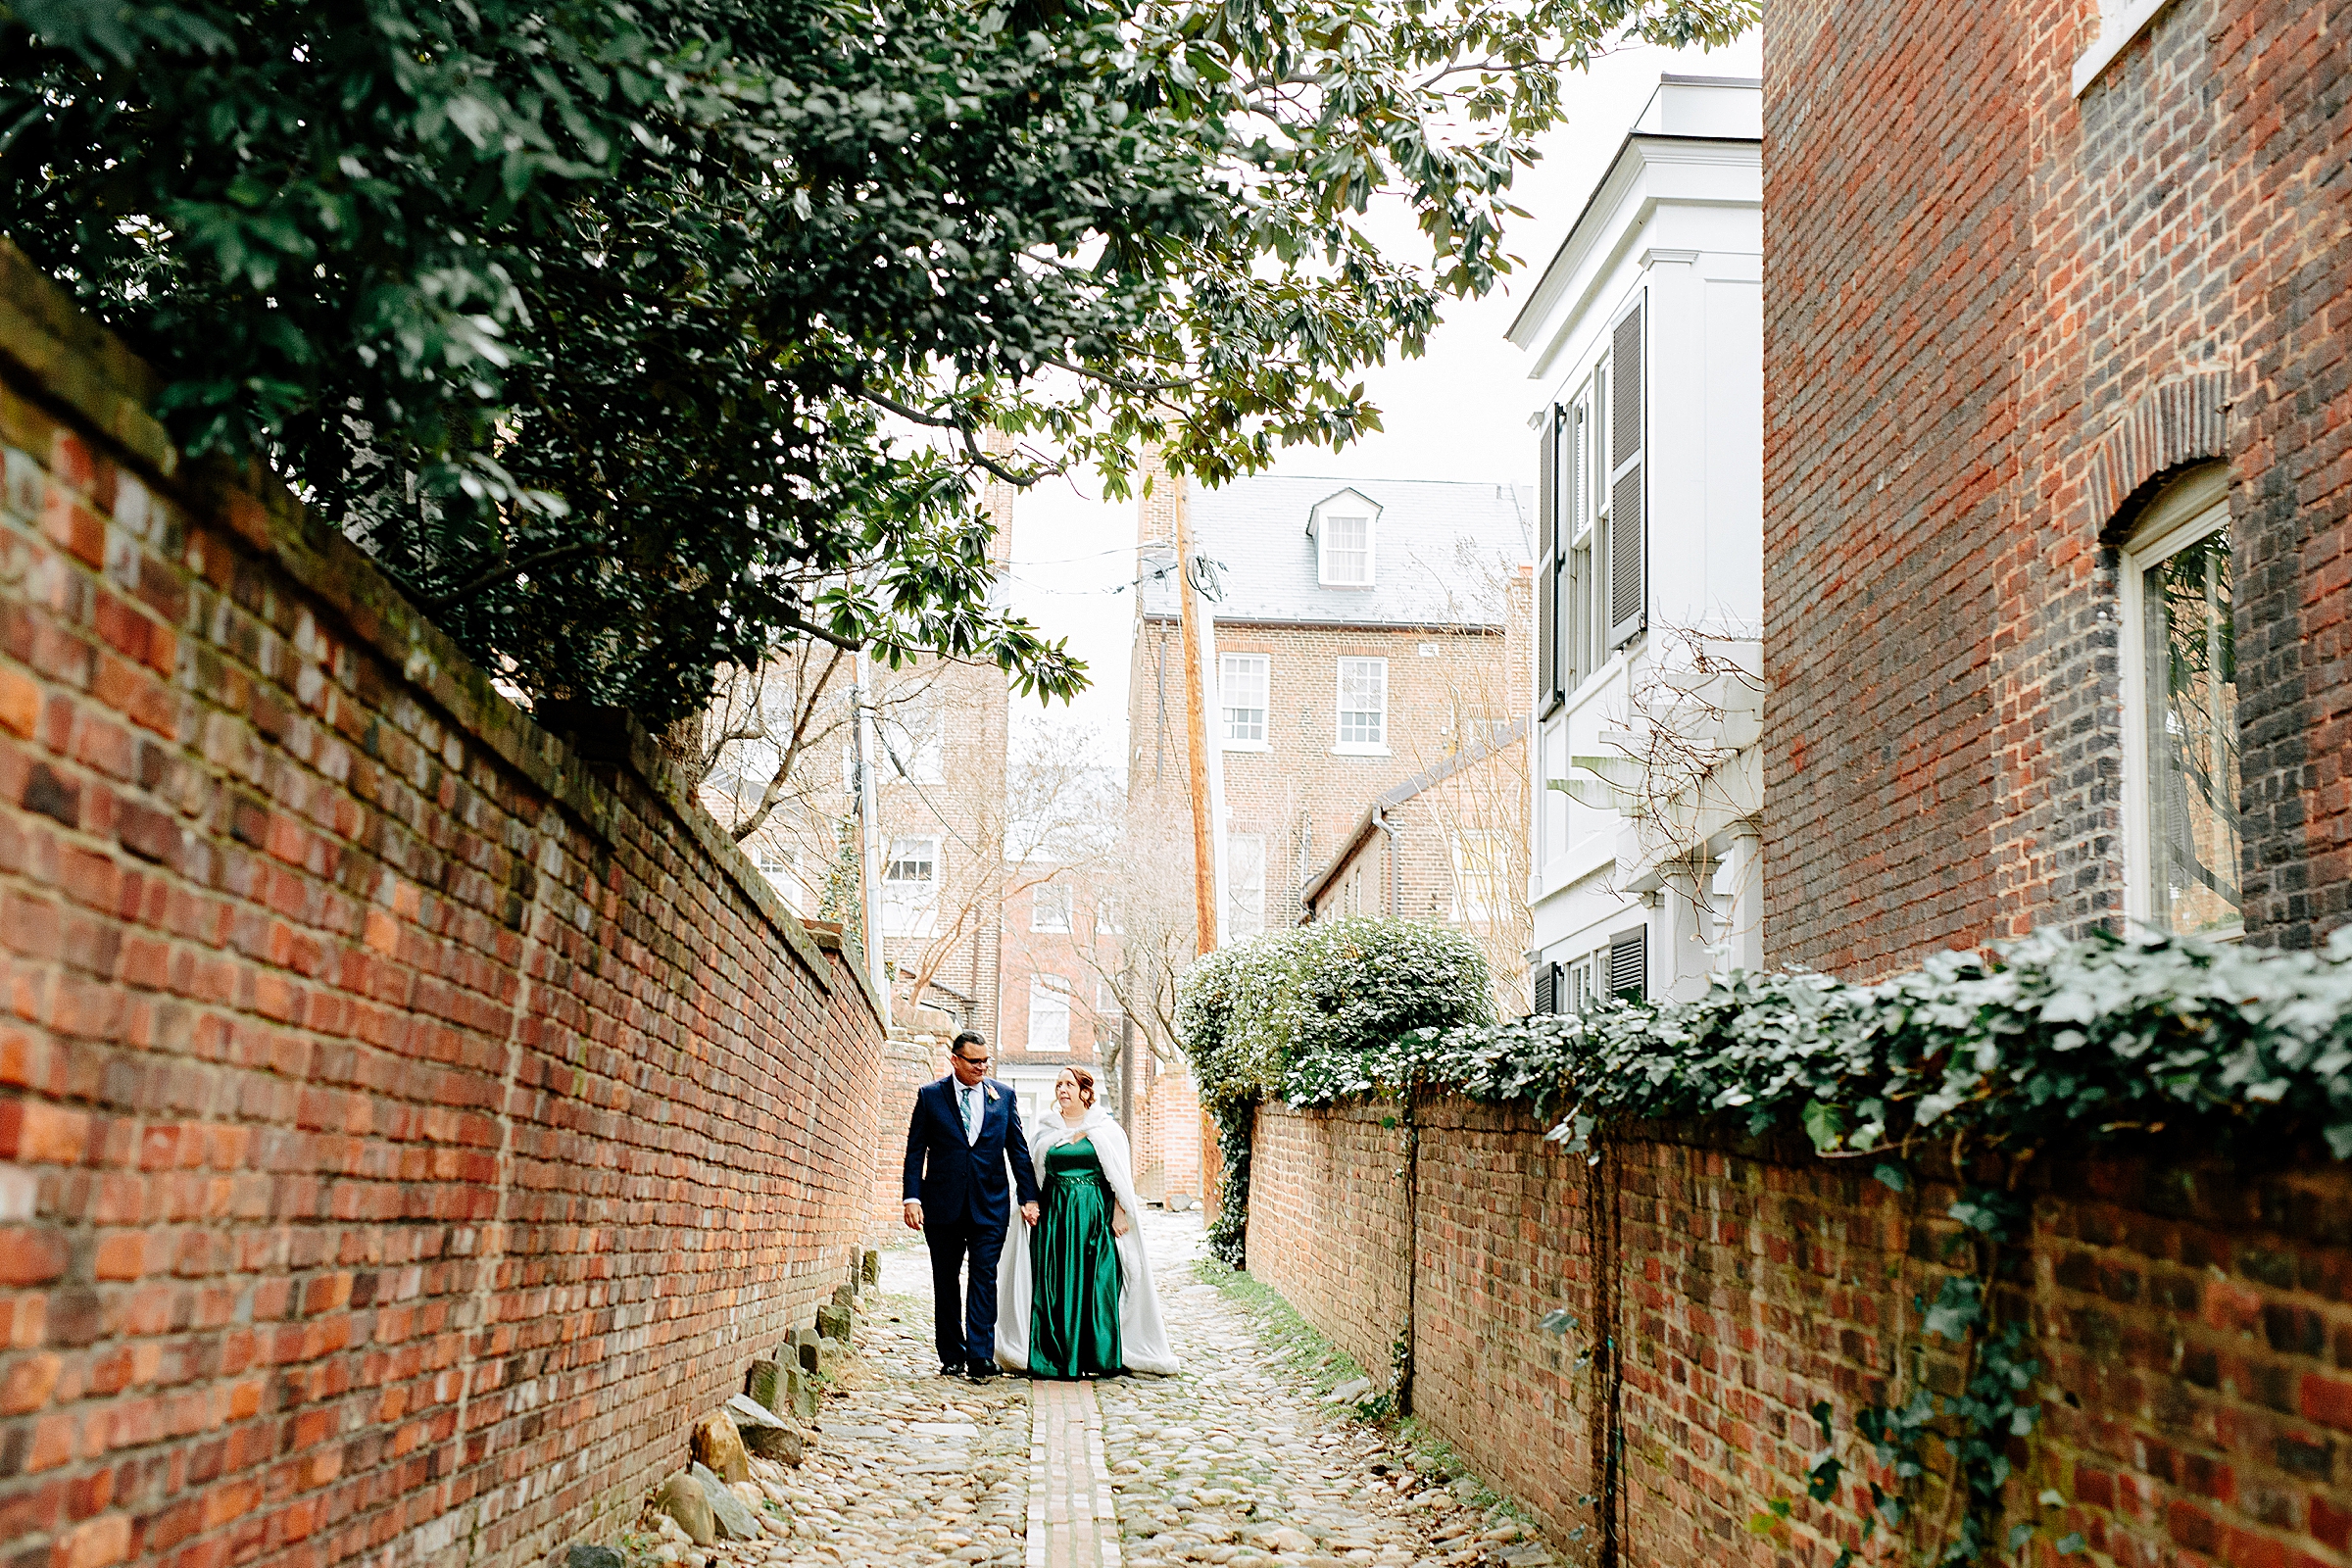 Alison & Luis's Old Town winter Elopement in Alexandria, Virginia with Seana Shuchart Photography